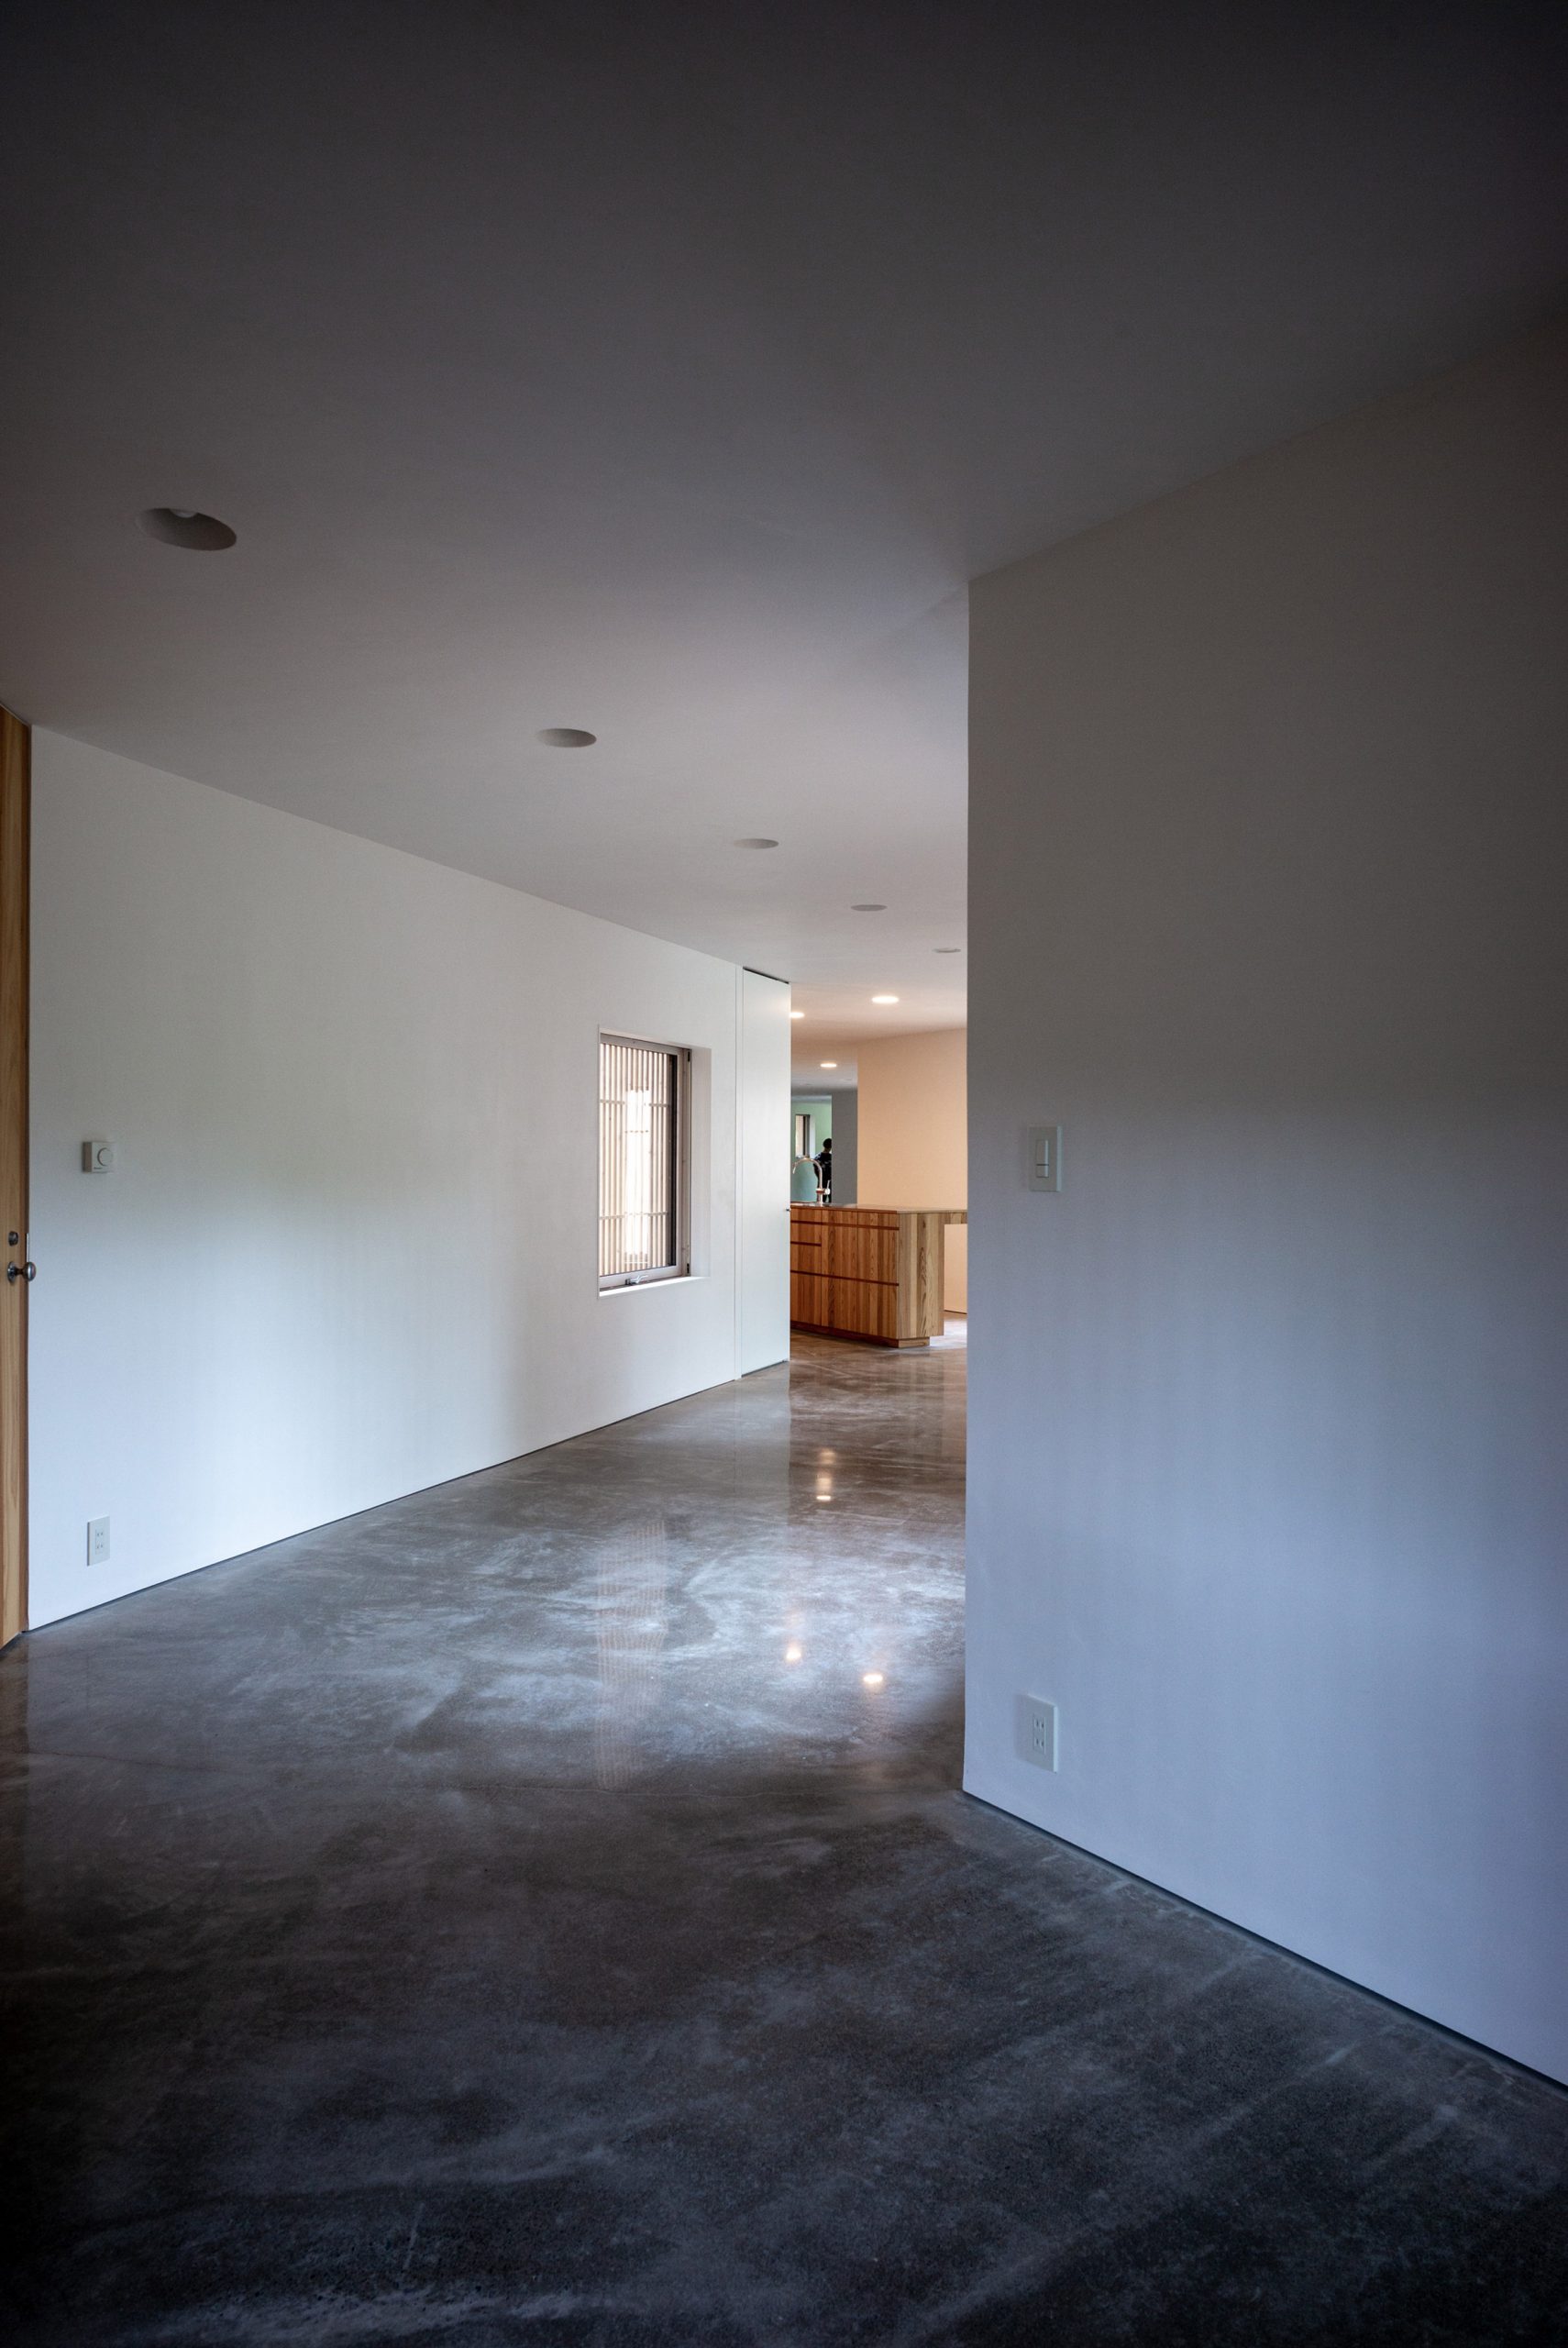 The interior has white walls and a polished concrete floor